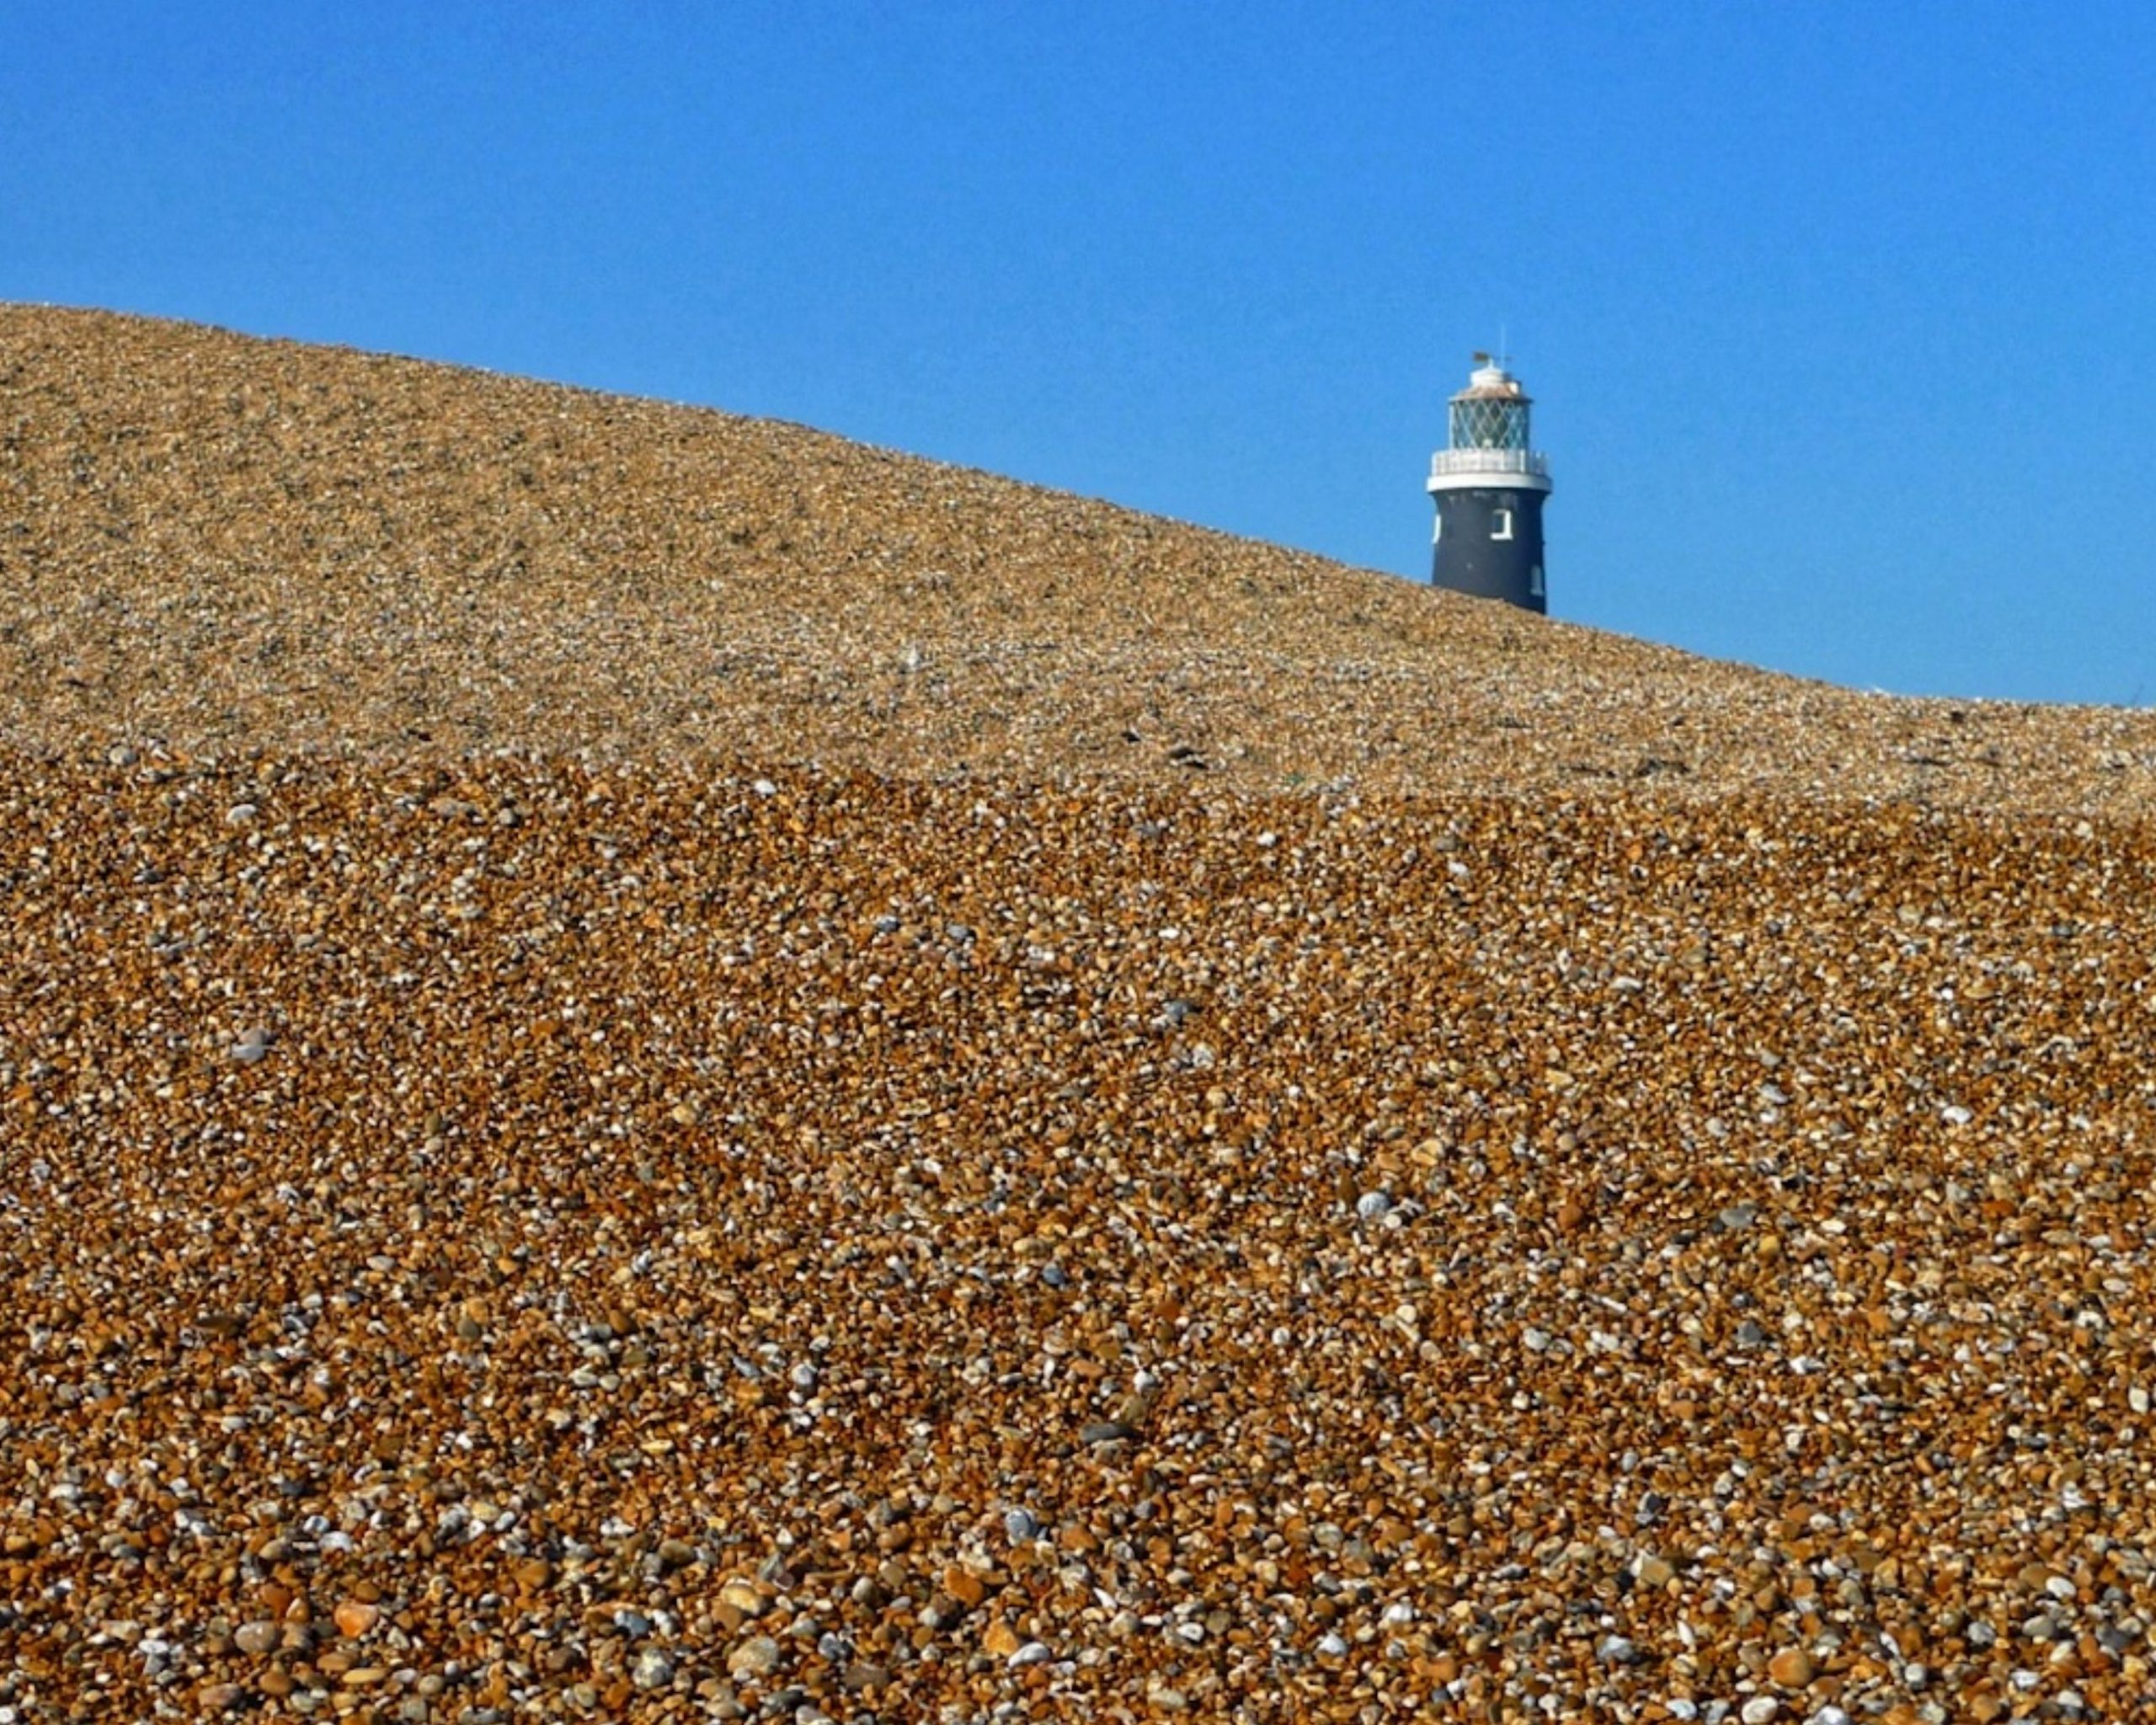 Dungeness lighthouse